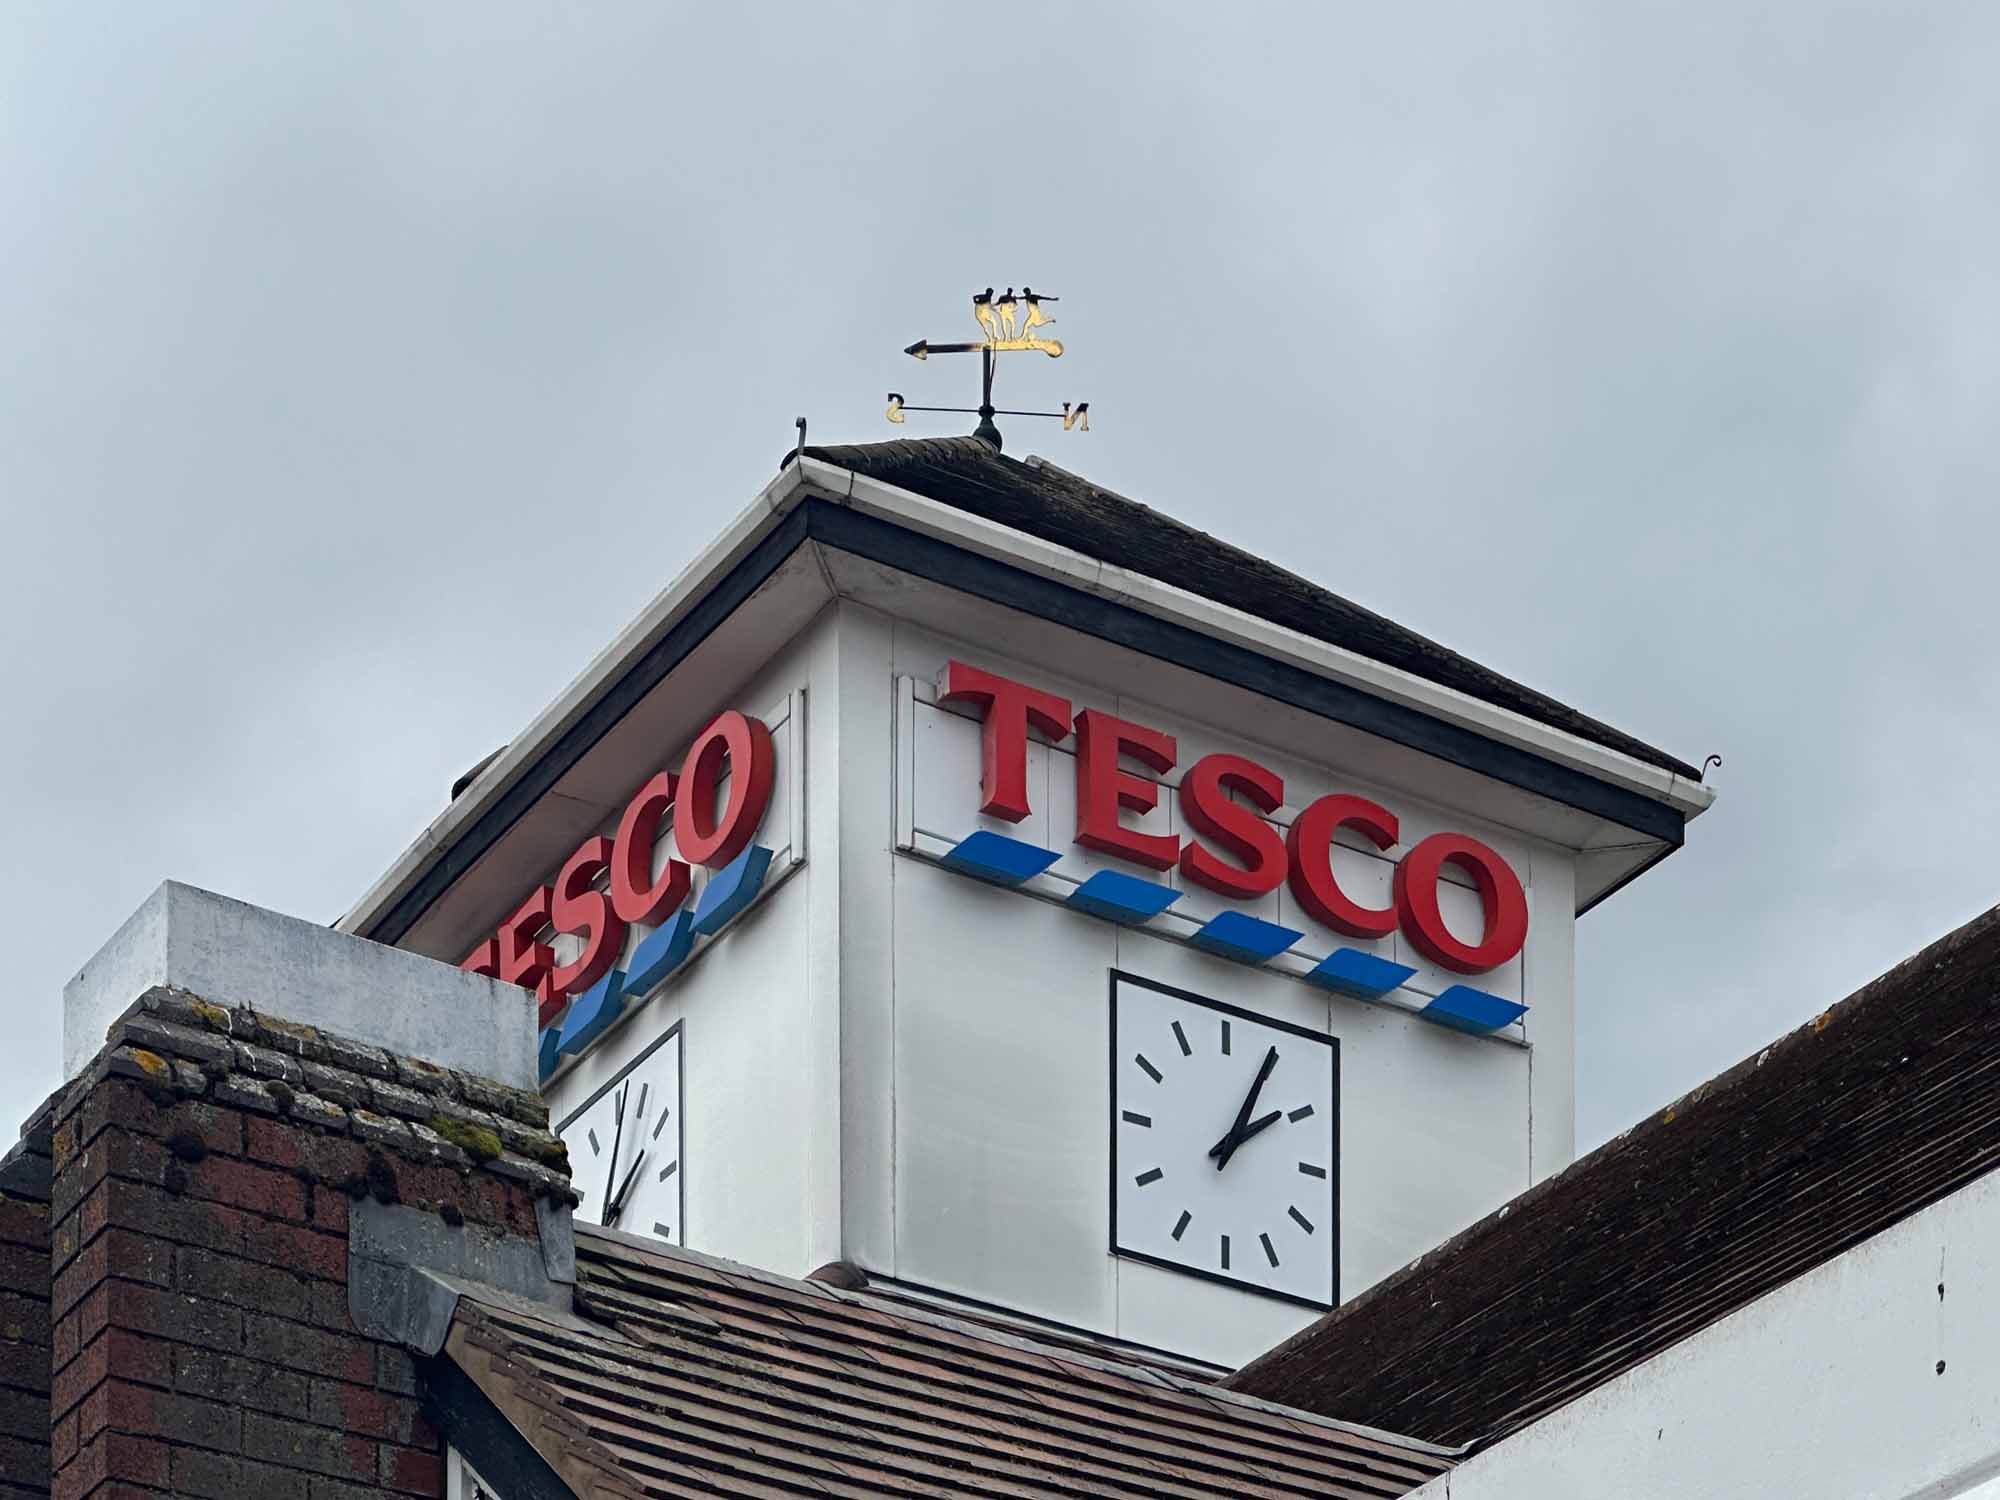 Planning application submitted for the redevelopment of Tesco Superstore in Harrow